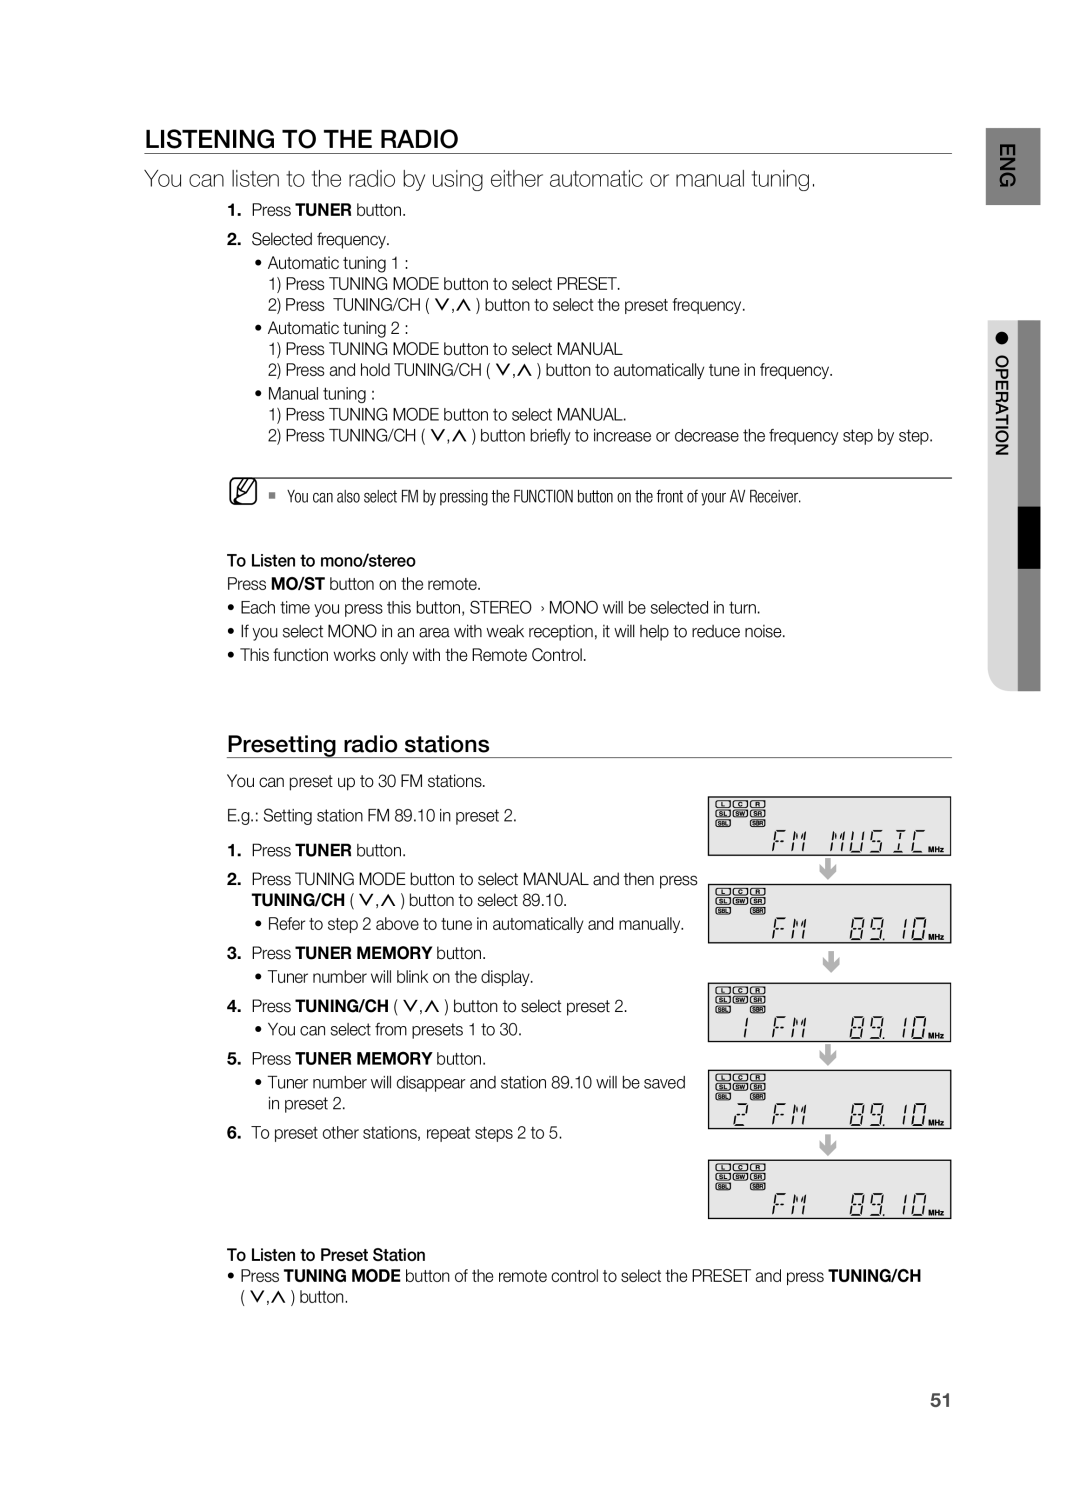 Samsung HT-AS730ST user manual LISTENING to the Radio, Presetting radio stations 